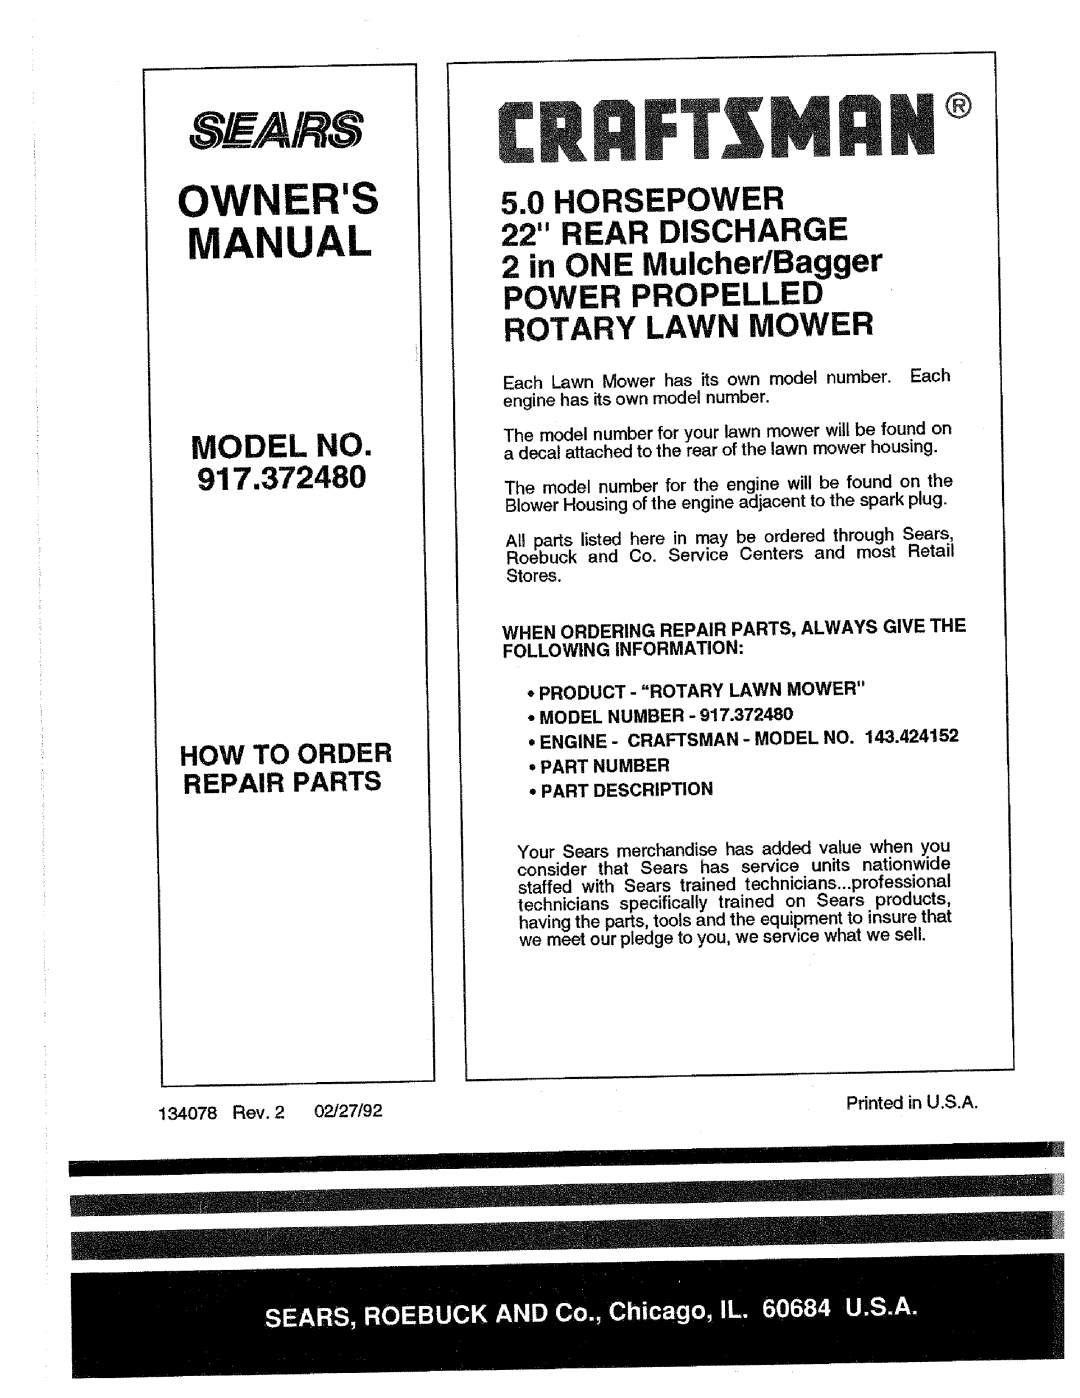 Craftsman 917.37248 Model No, HORSEPOWER 22 REAR DISCHARGE, in ONE Mulcher/Bagger, Power Propelled Rotary Lawn Mower 